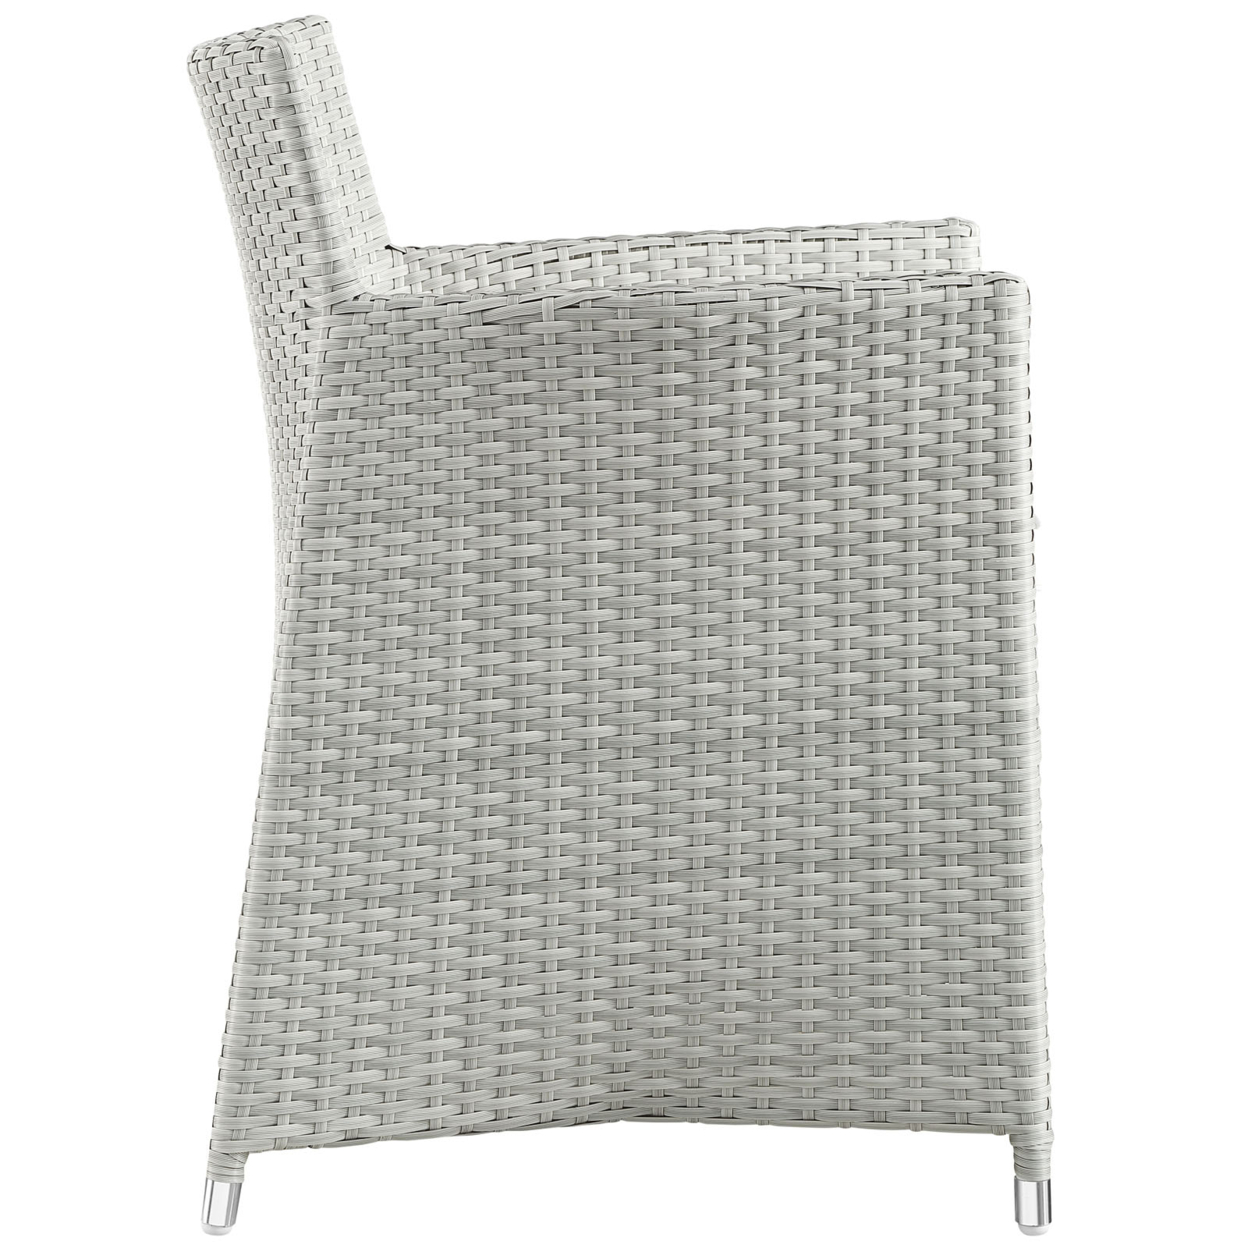 Gray White Junction Armchair Outdoor Patio Wicker Set of 2 - image 3 of 4